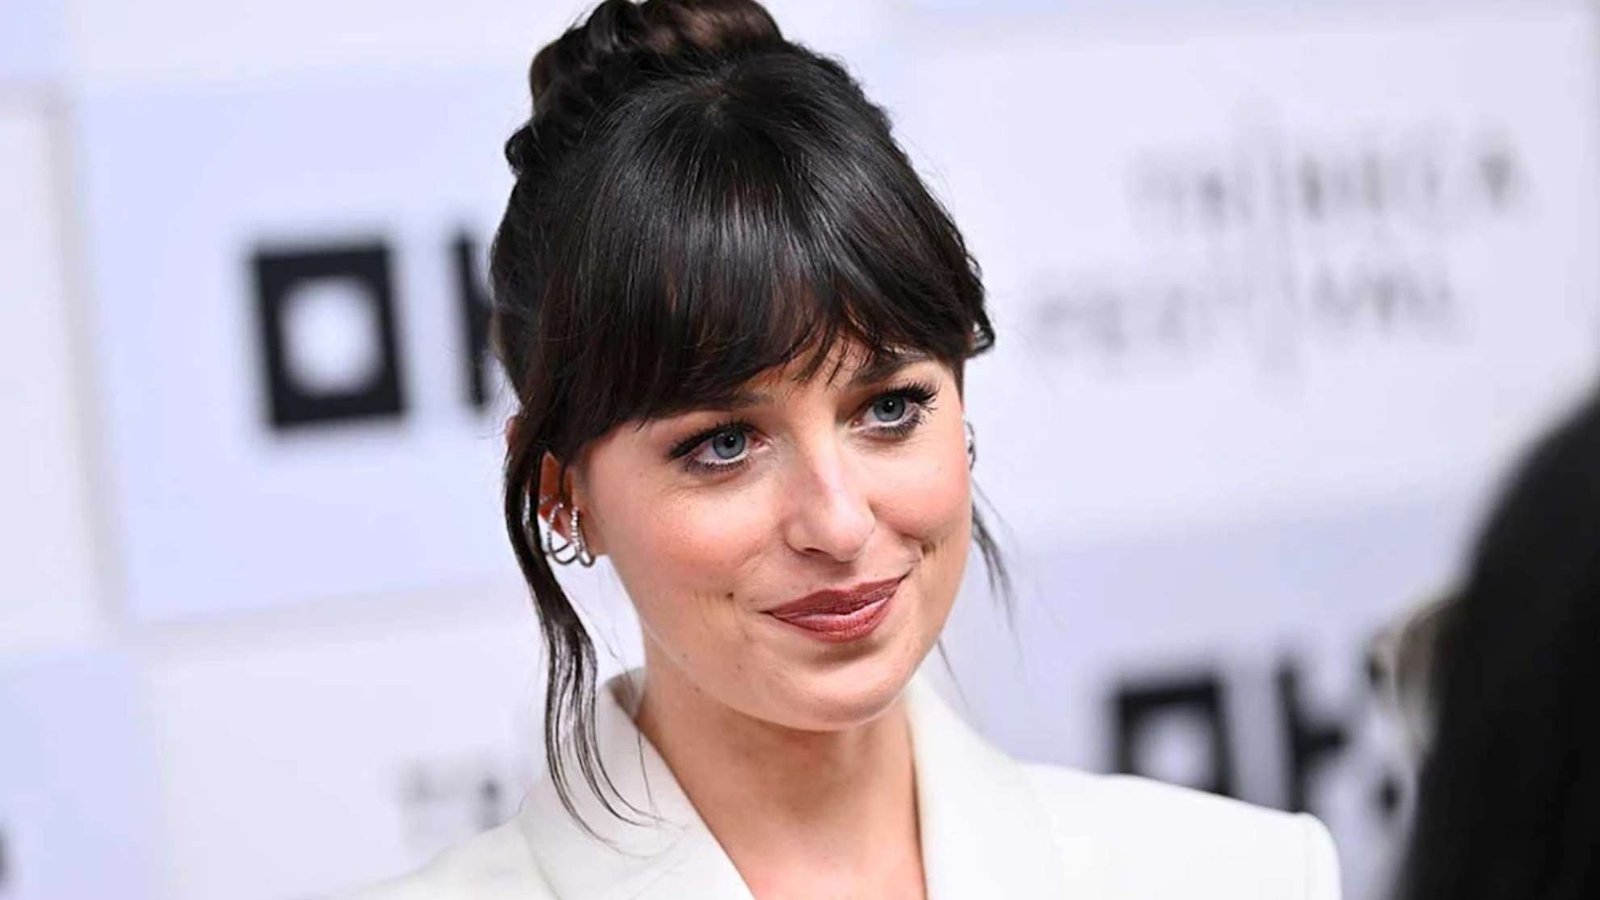 Dakota Johnson Set to Host 'SNL' with Justin Timberlake as Featured Musical Guest